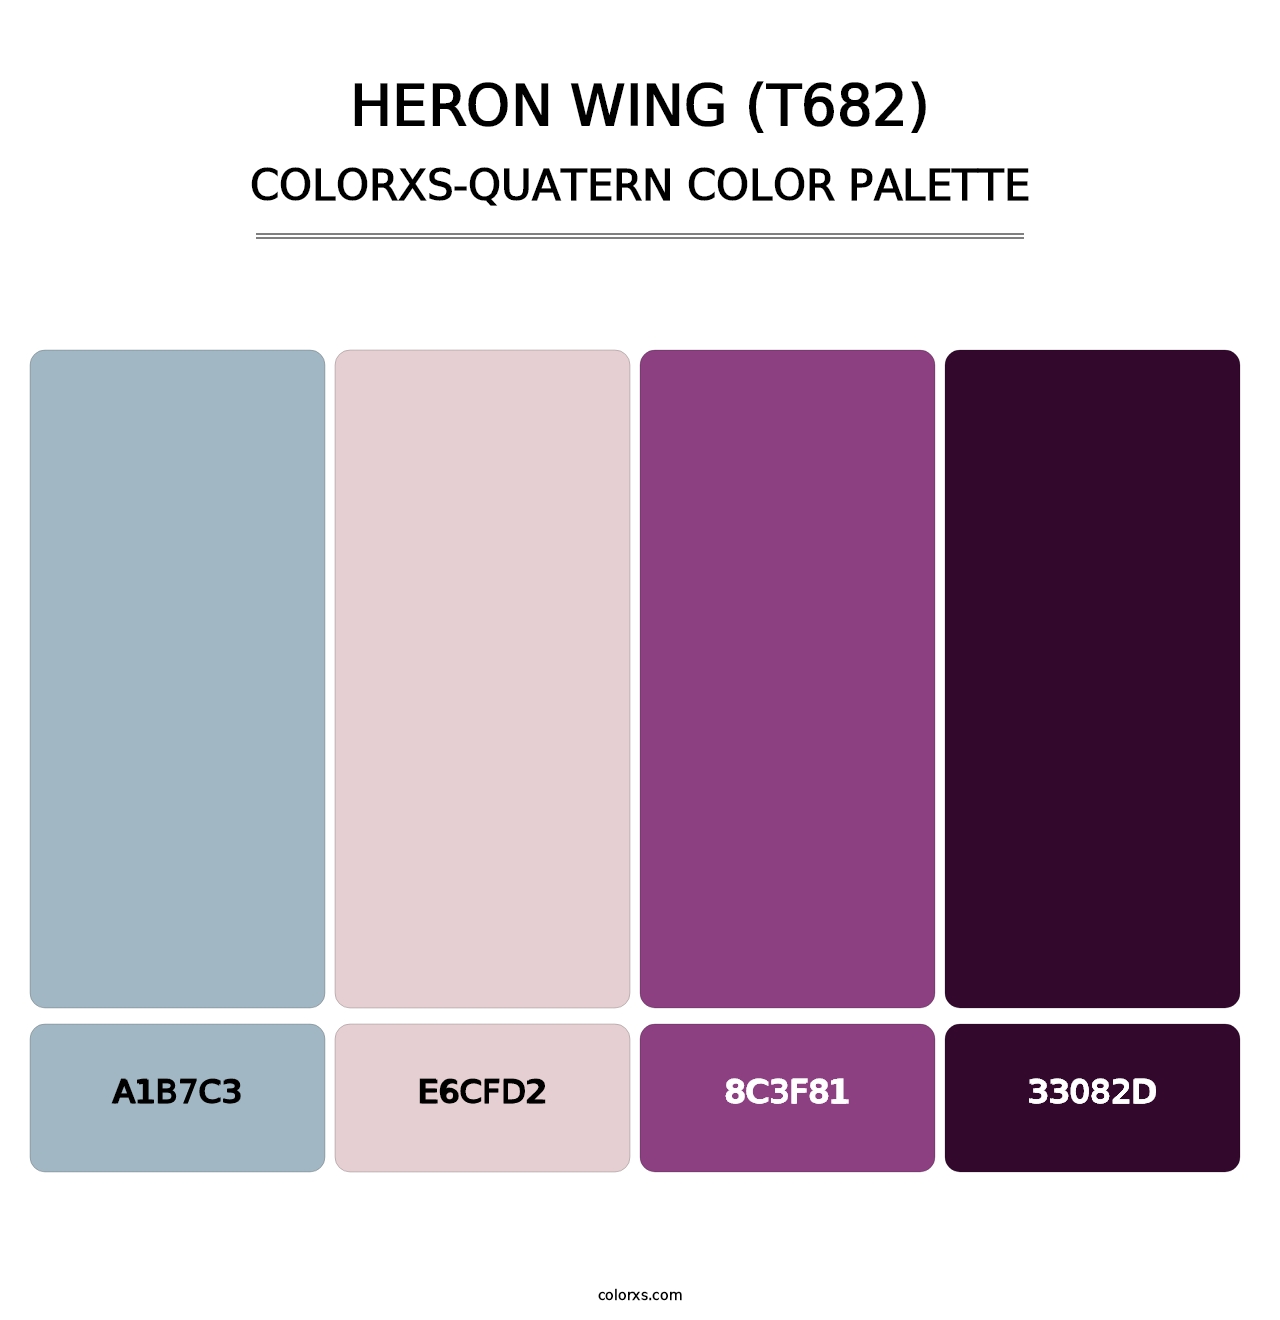 Heron Wing (T682) - Colorxs Quatern Palette